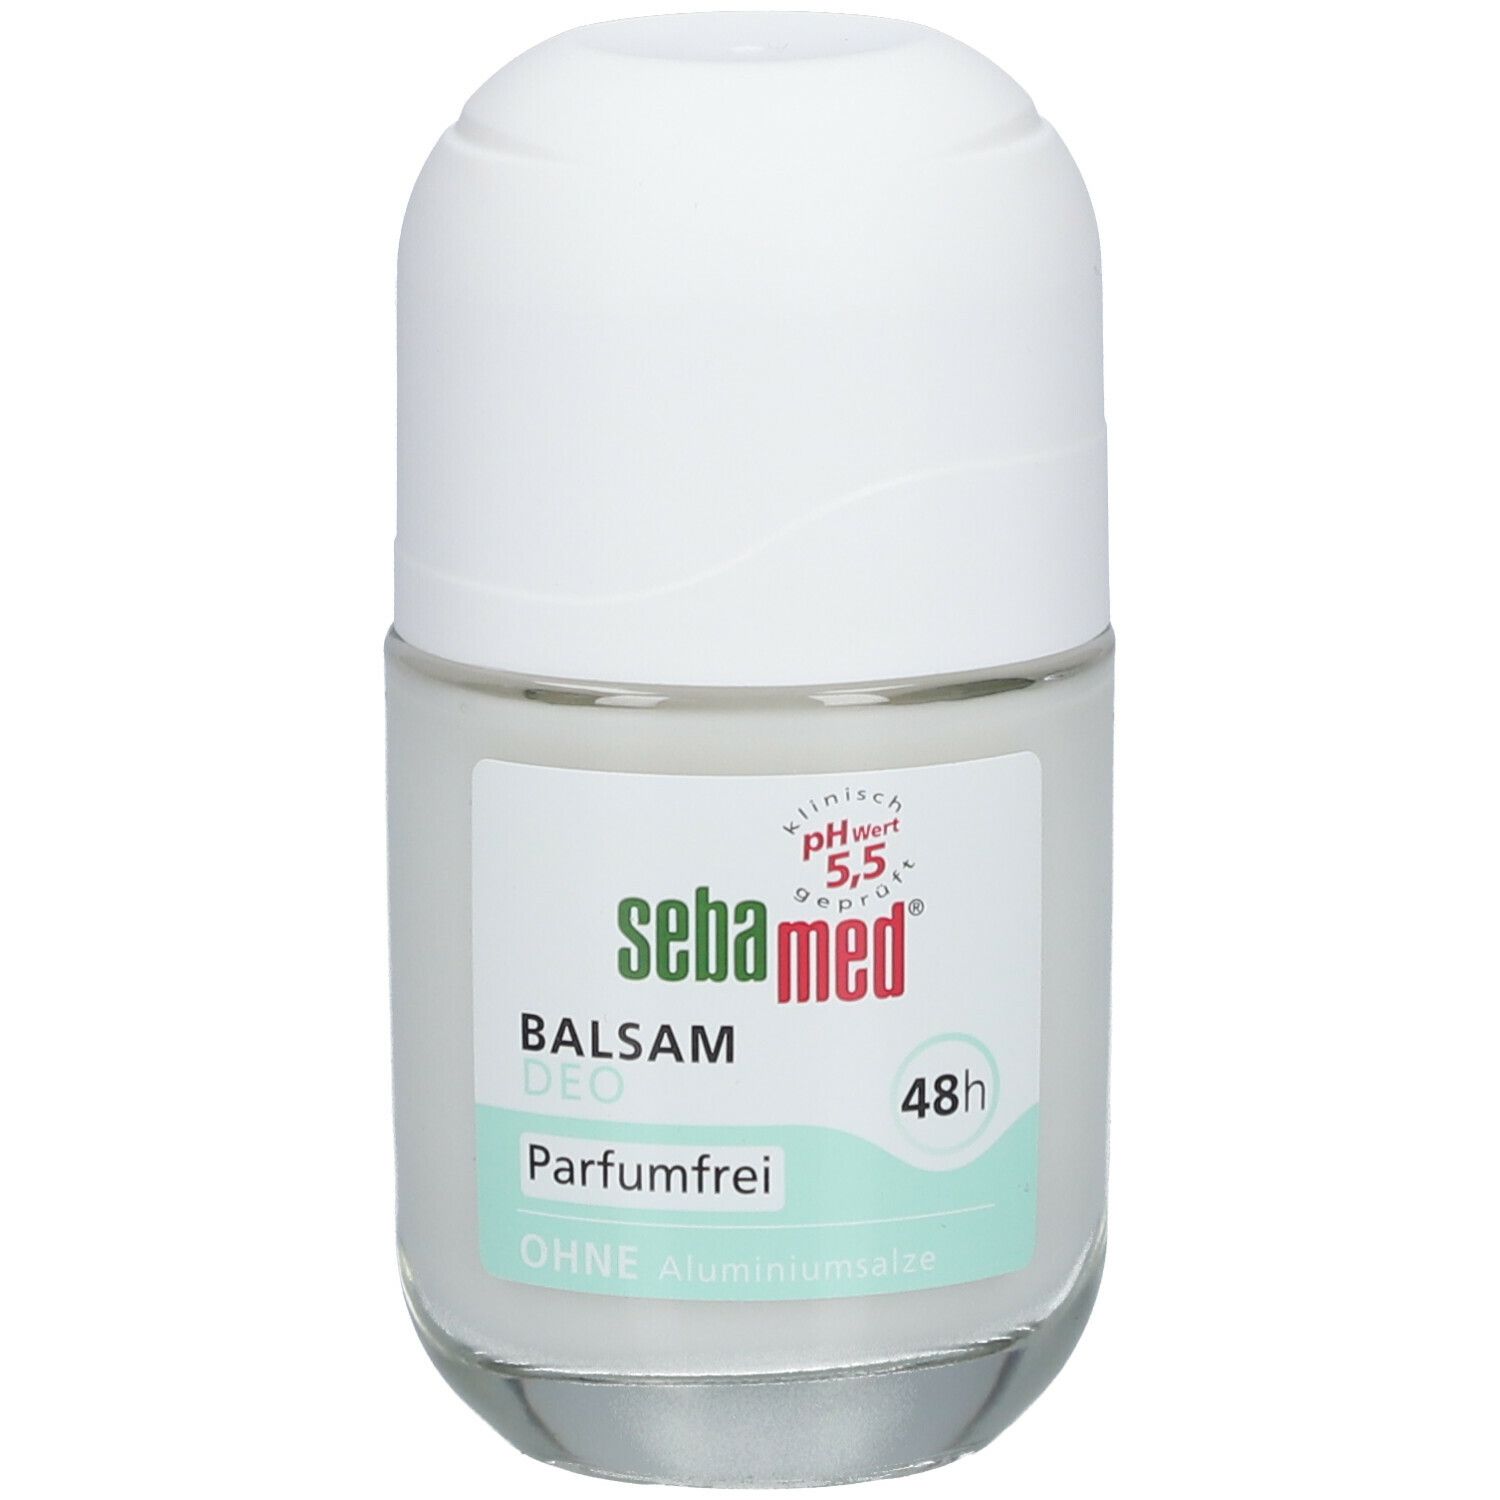 Image of Balsam Deo Parfumfrei Roll-On